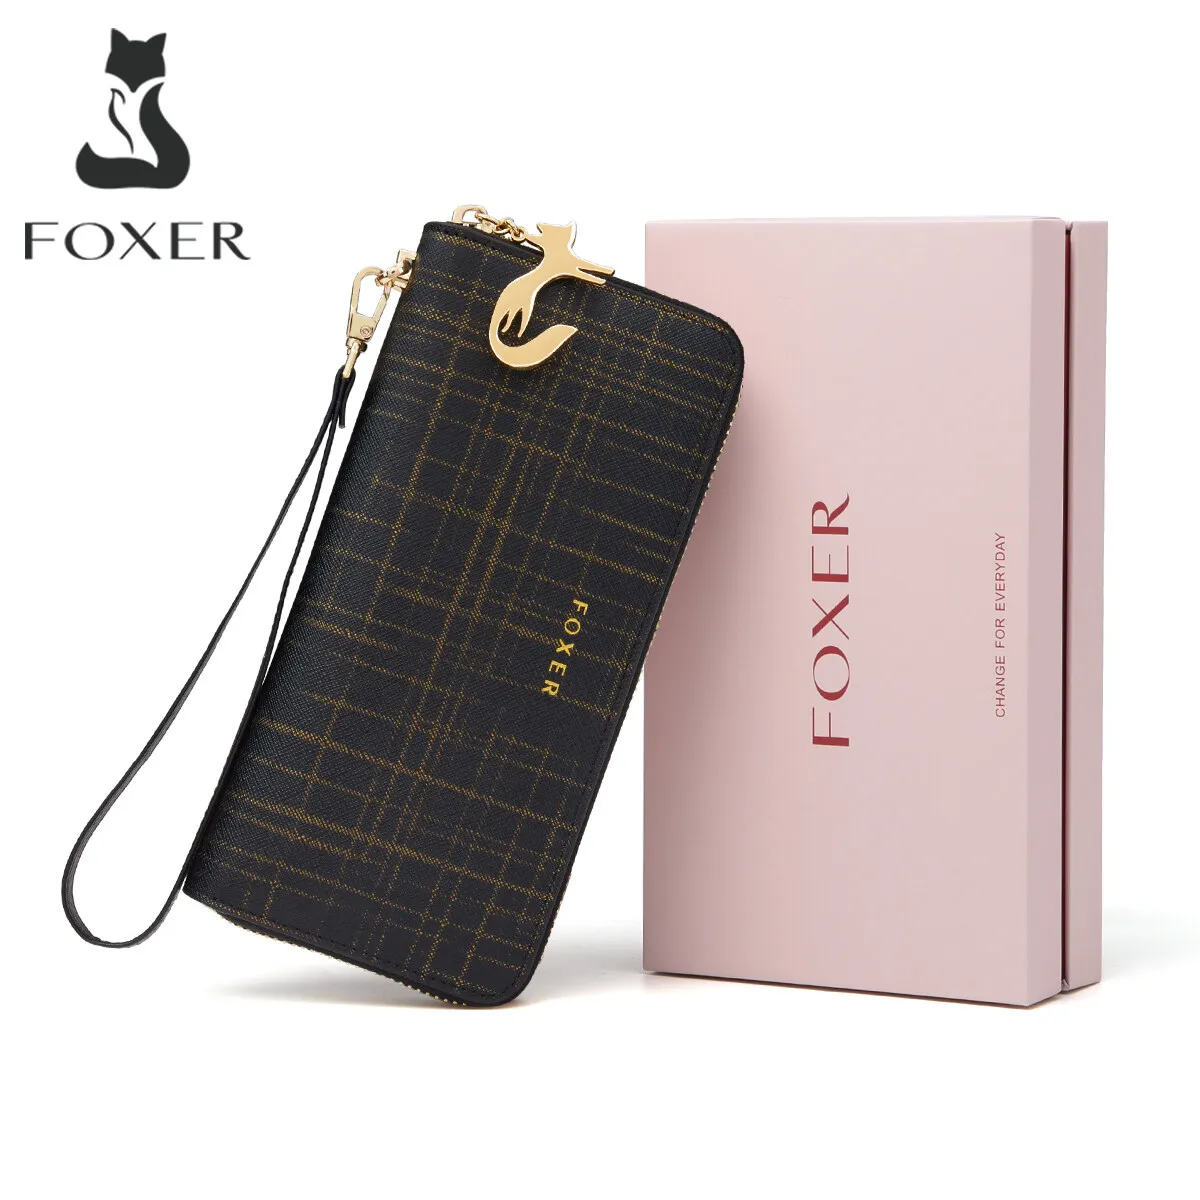 FOXER Women Split Leather Long Wallet Fashion Coin Purse Lady Bifold Clutch Bag With Wristband Phone Bags For Female Card Holder